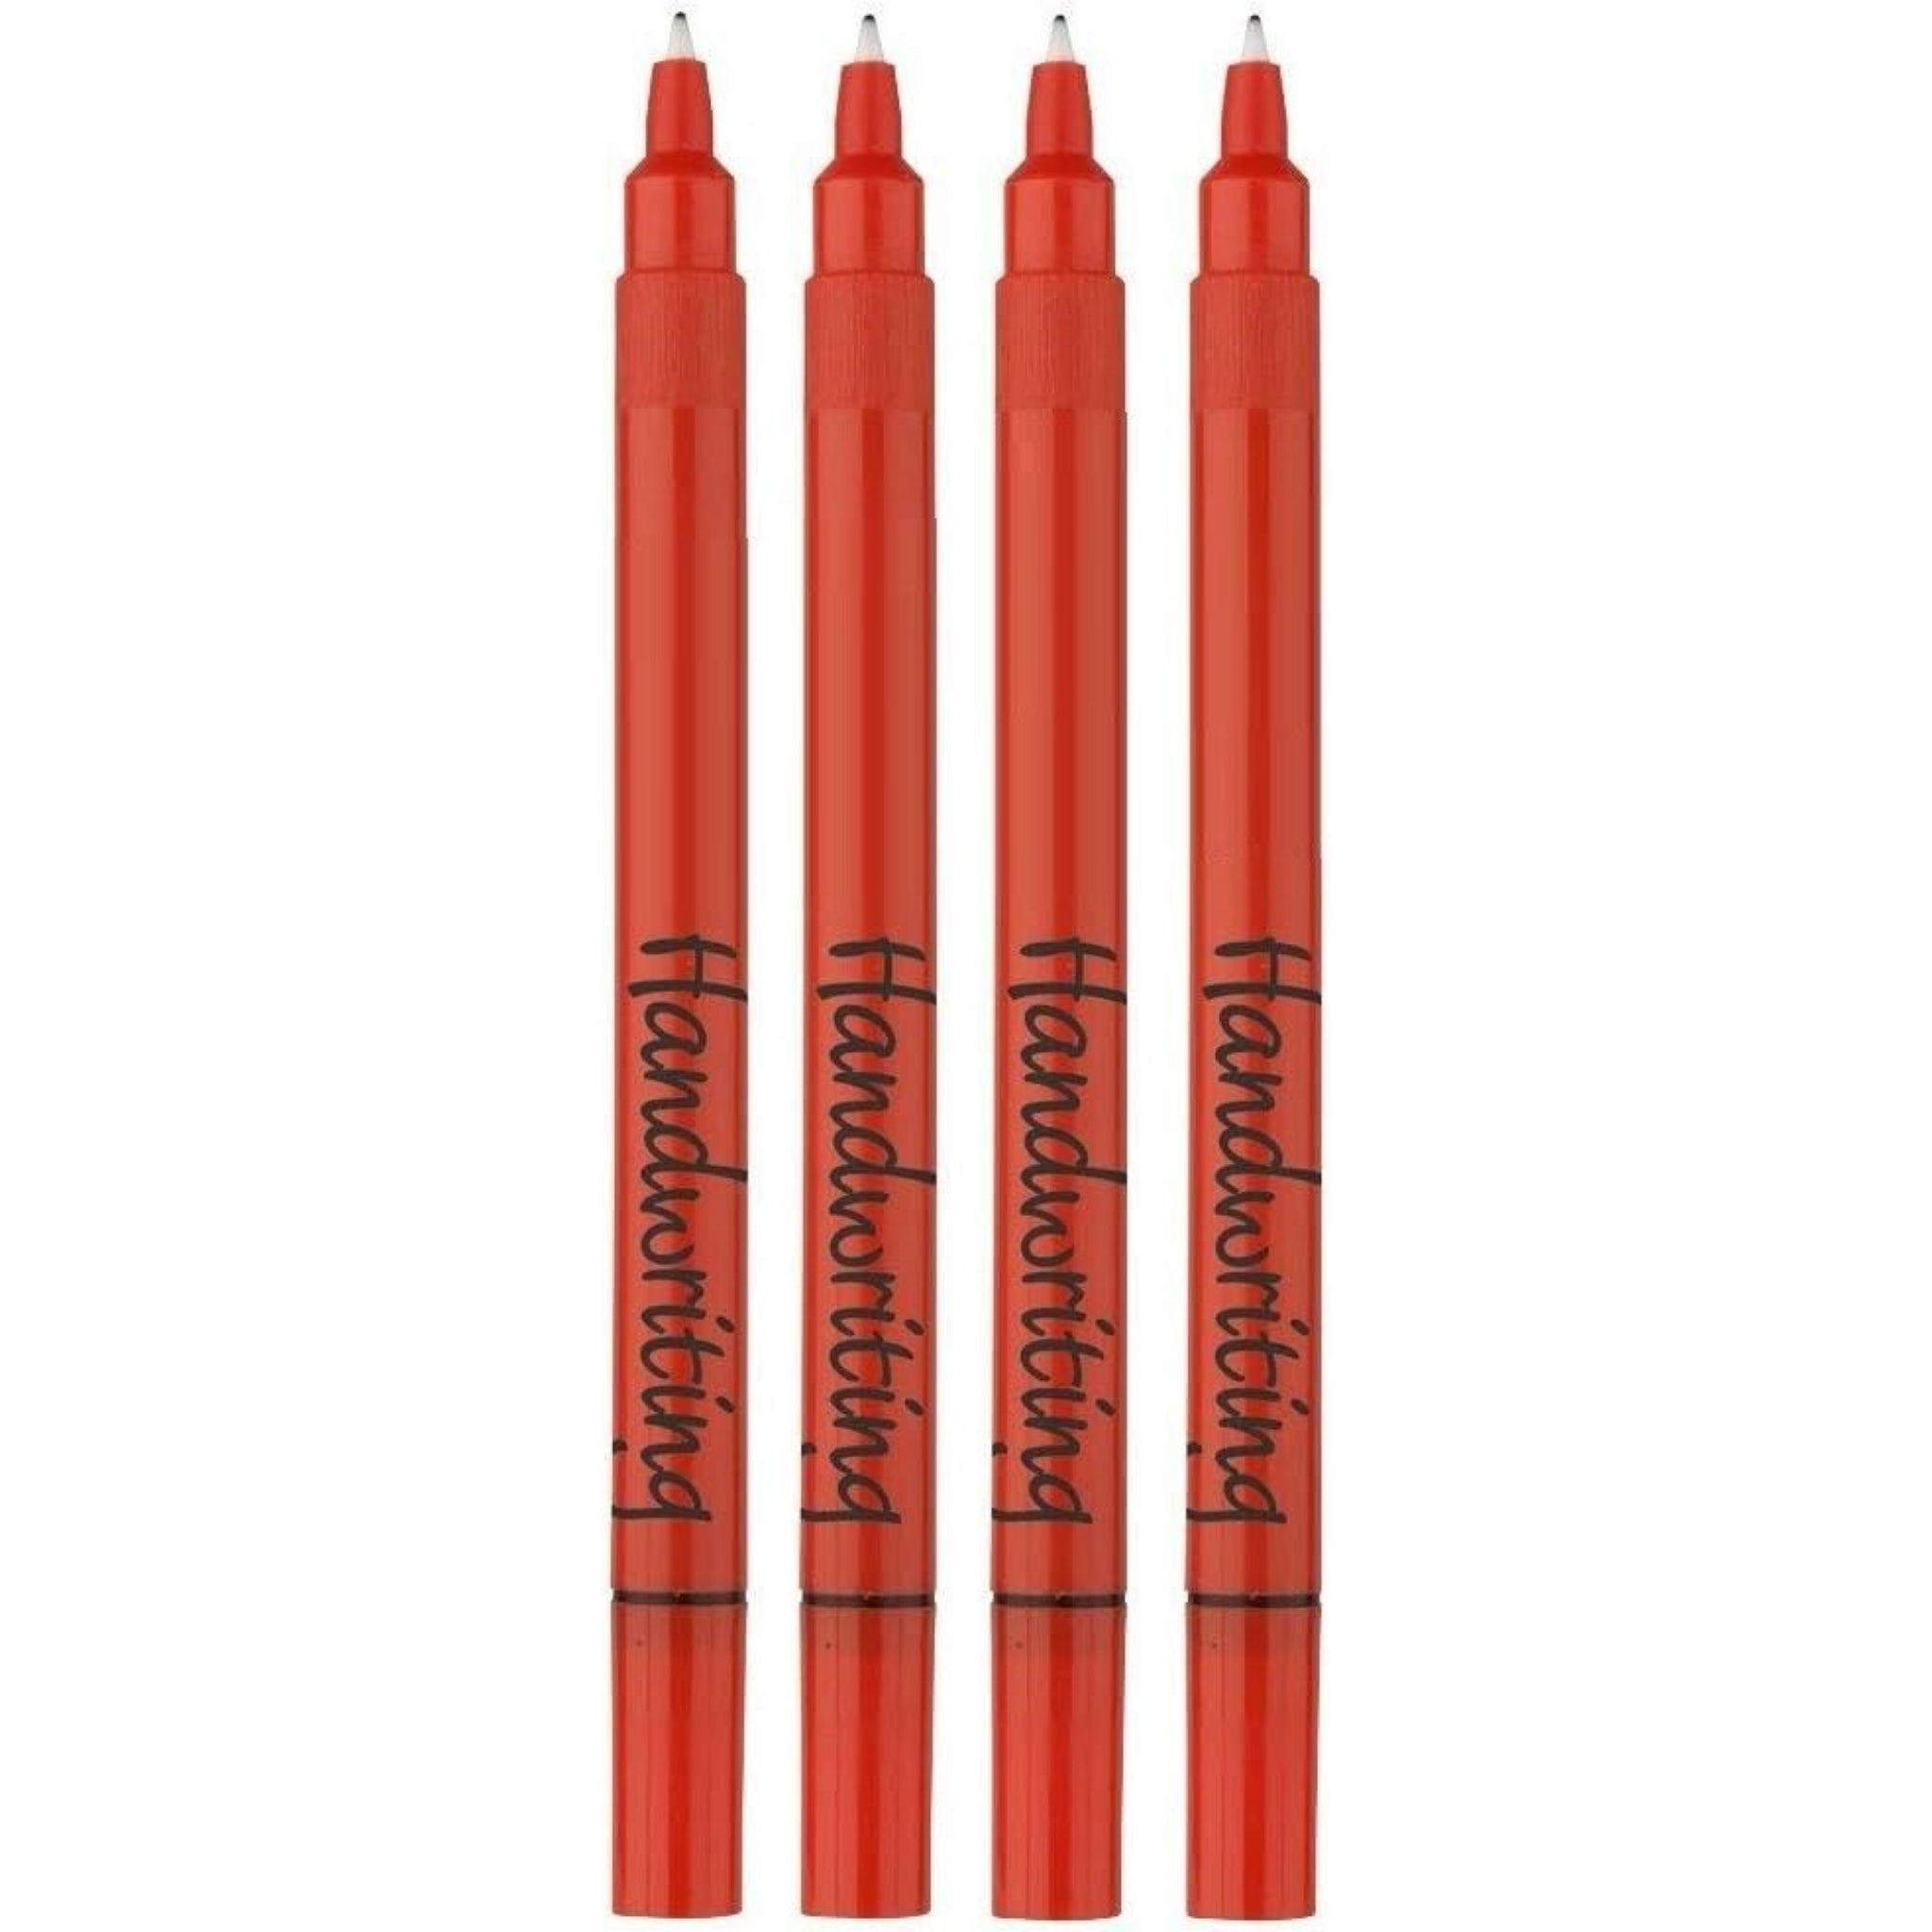 Beclen Harp 4 / 8 / 12 HANDWRITING PENS Quality Fine Tip BLUE ink School Office Stationery